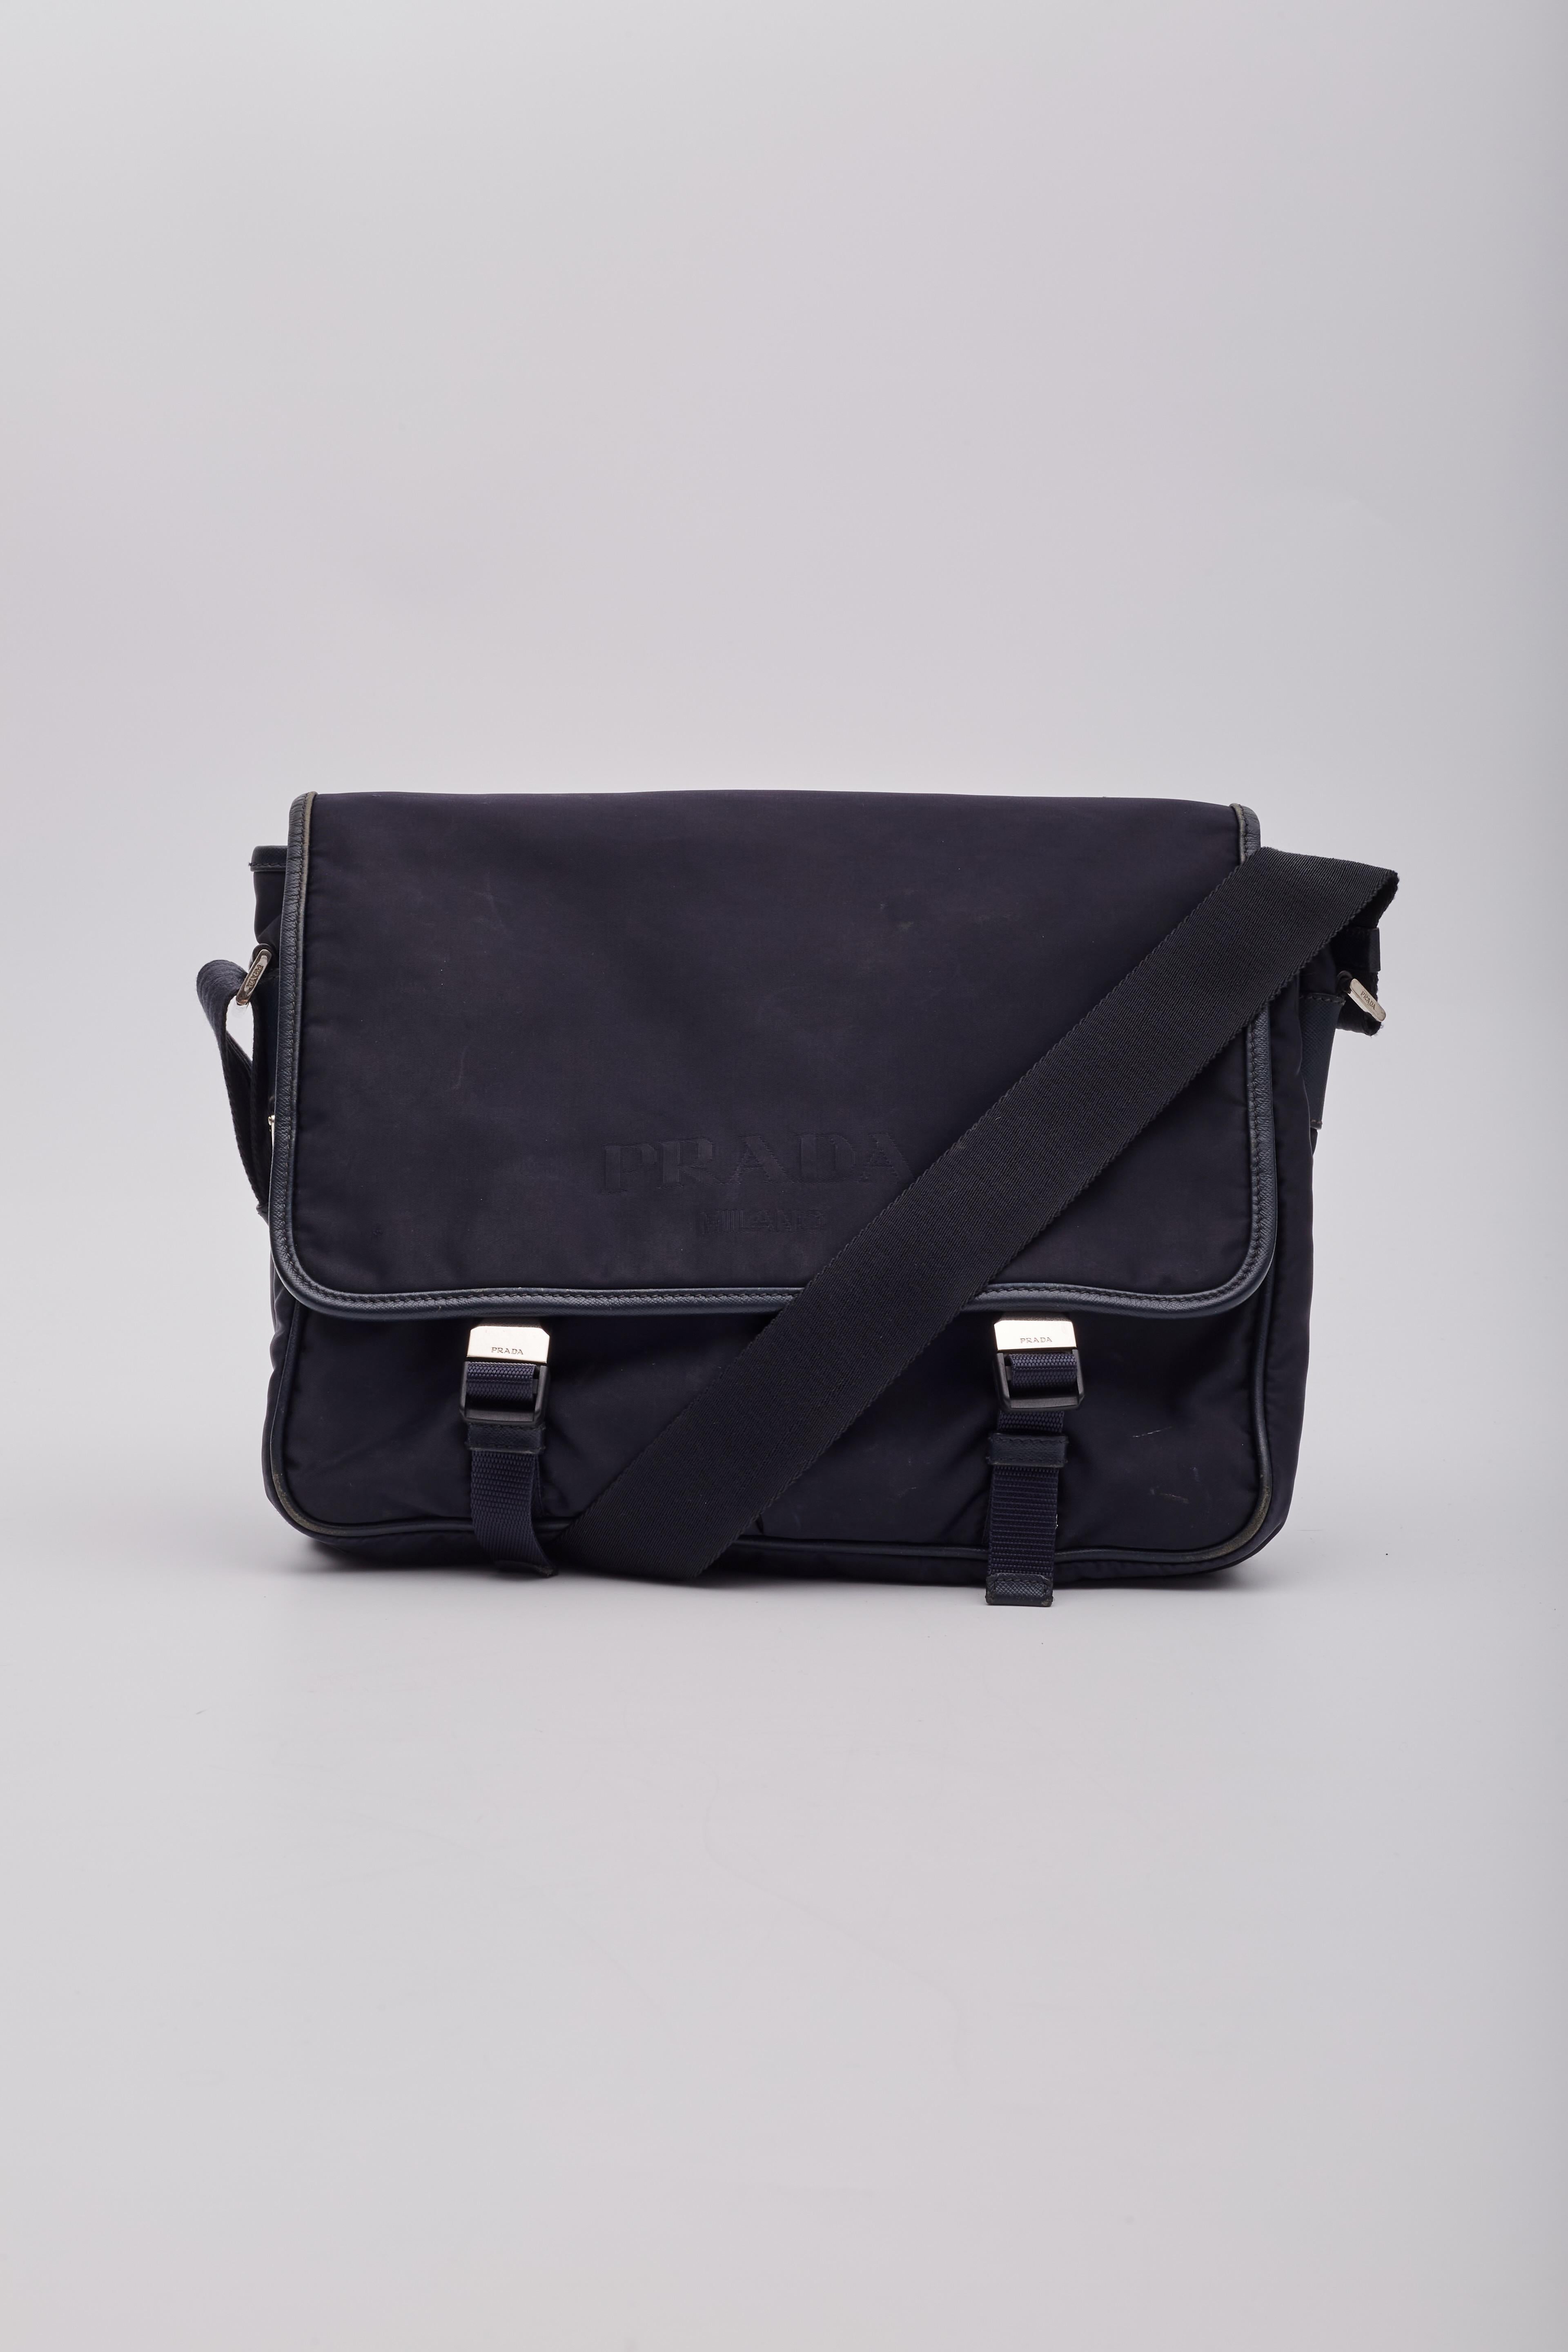 The Prada messenger bag is made of black Tessuto nylon with saffiano leather trim embellishments. The bag features a single exterior pocket, a large flap with double buckle closure at the front and silver tone hardware. The bag is finished with logo